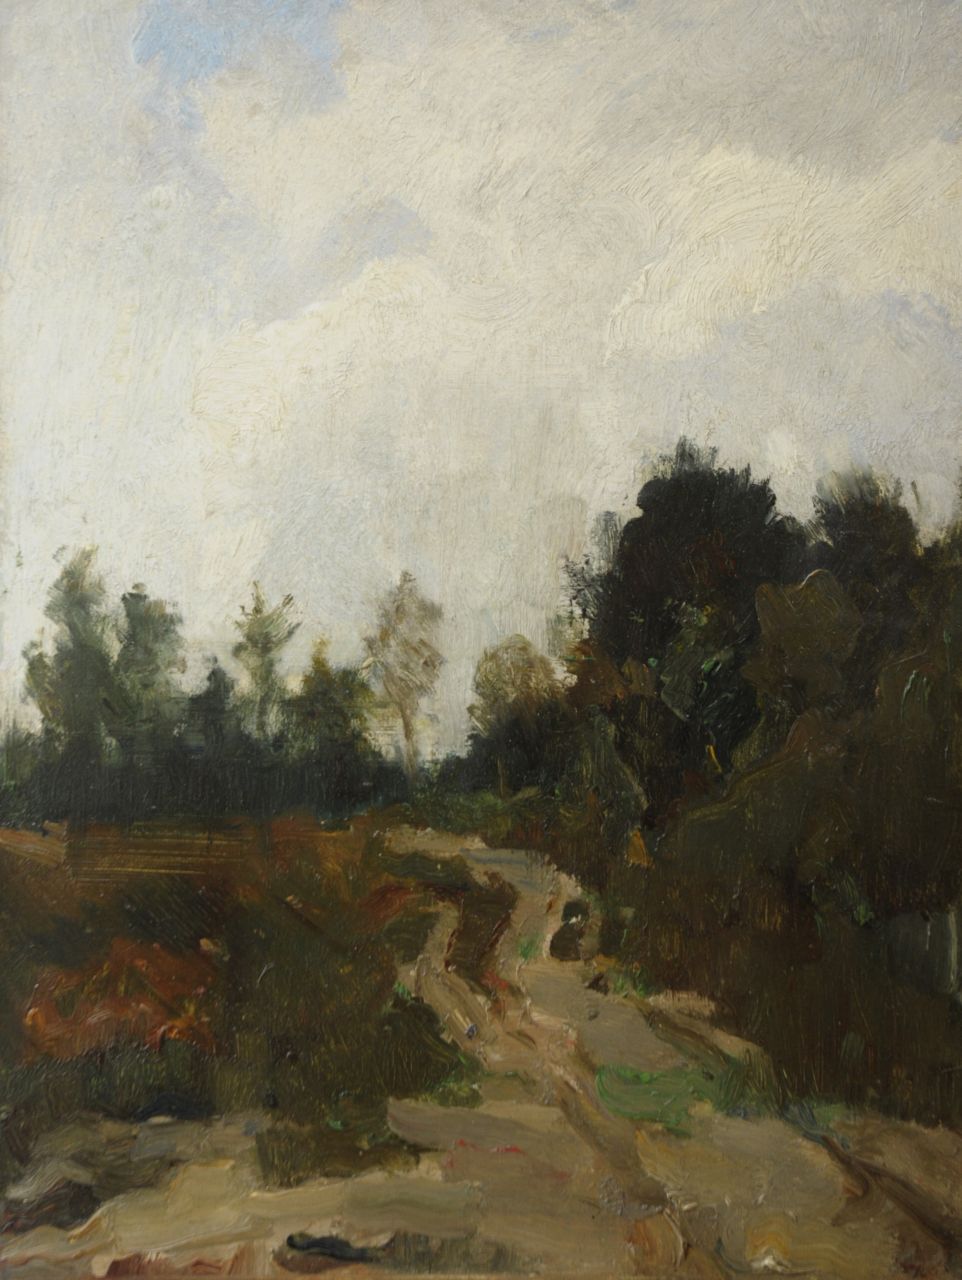 Frankfort E.  | Eduard Frankfort, Sandy path in a wooded landscape, oil on board 36.1 x 27.1 cm